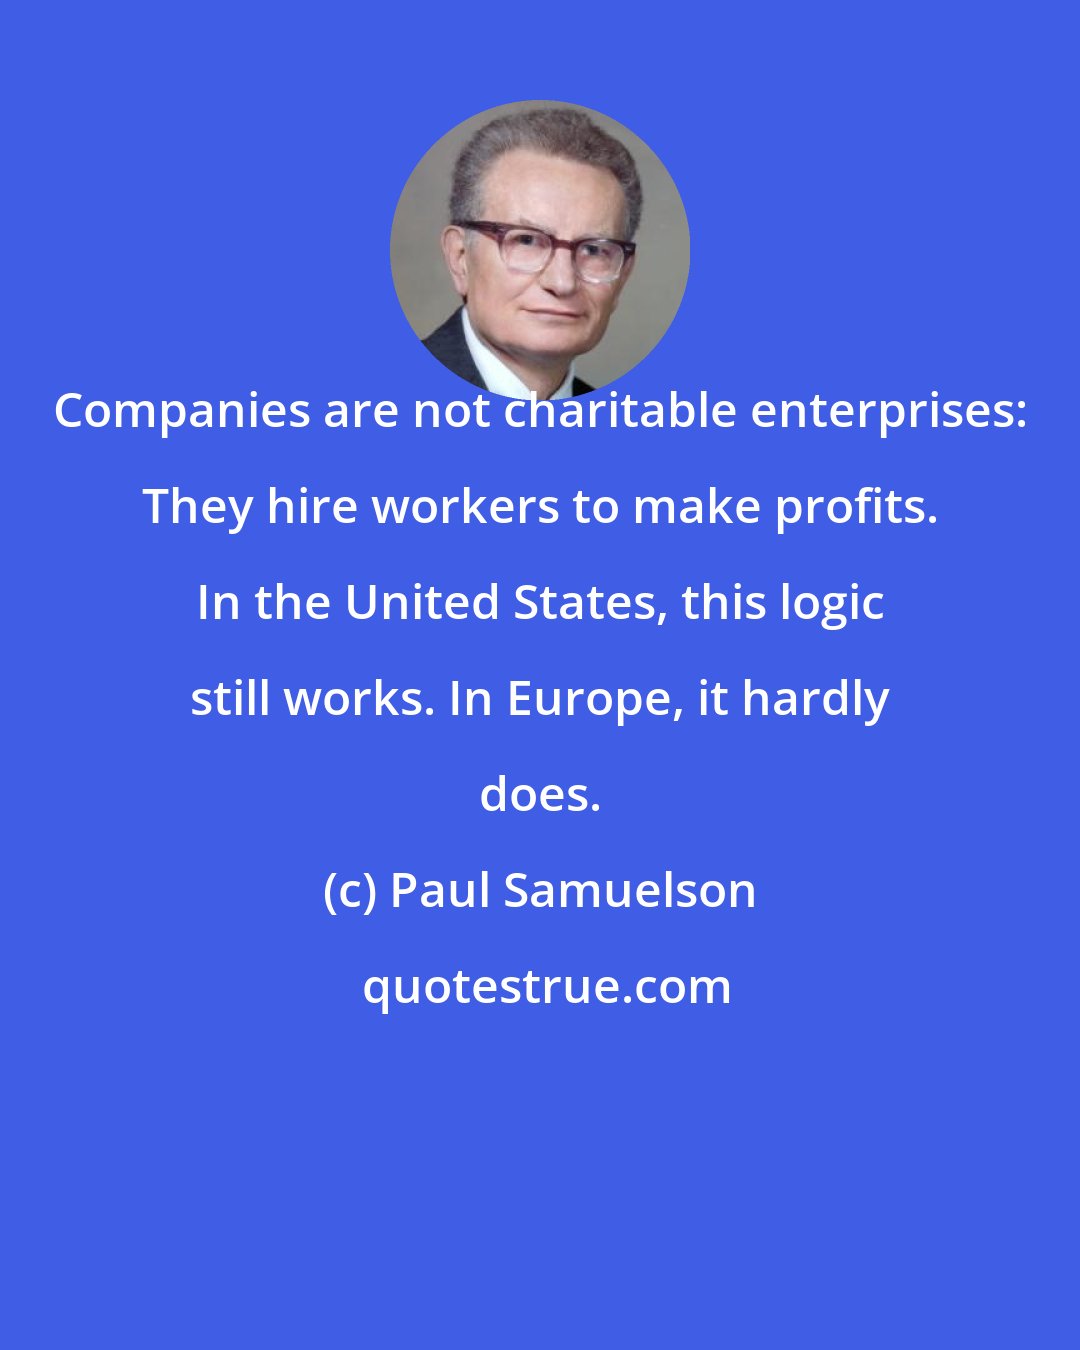 Paul Samuelson: Companies are not charitable enterprises: They hire workers to make profits. In the United States, this logic still works. In Europe, it hardly does.